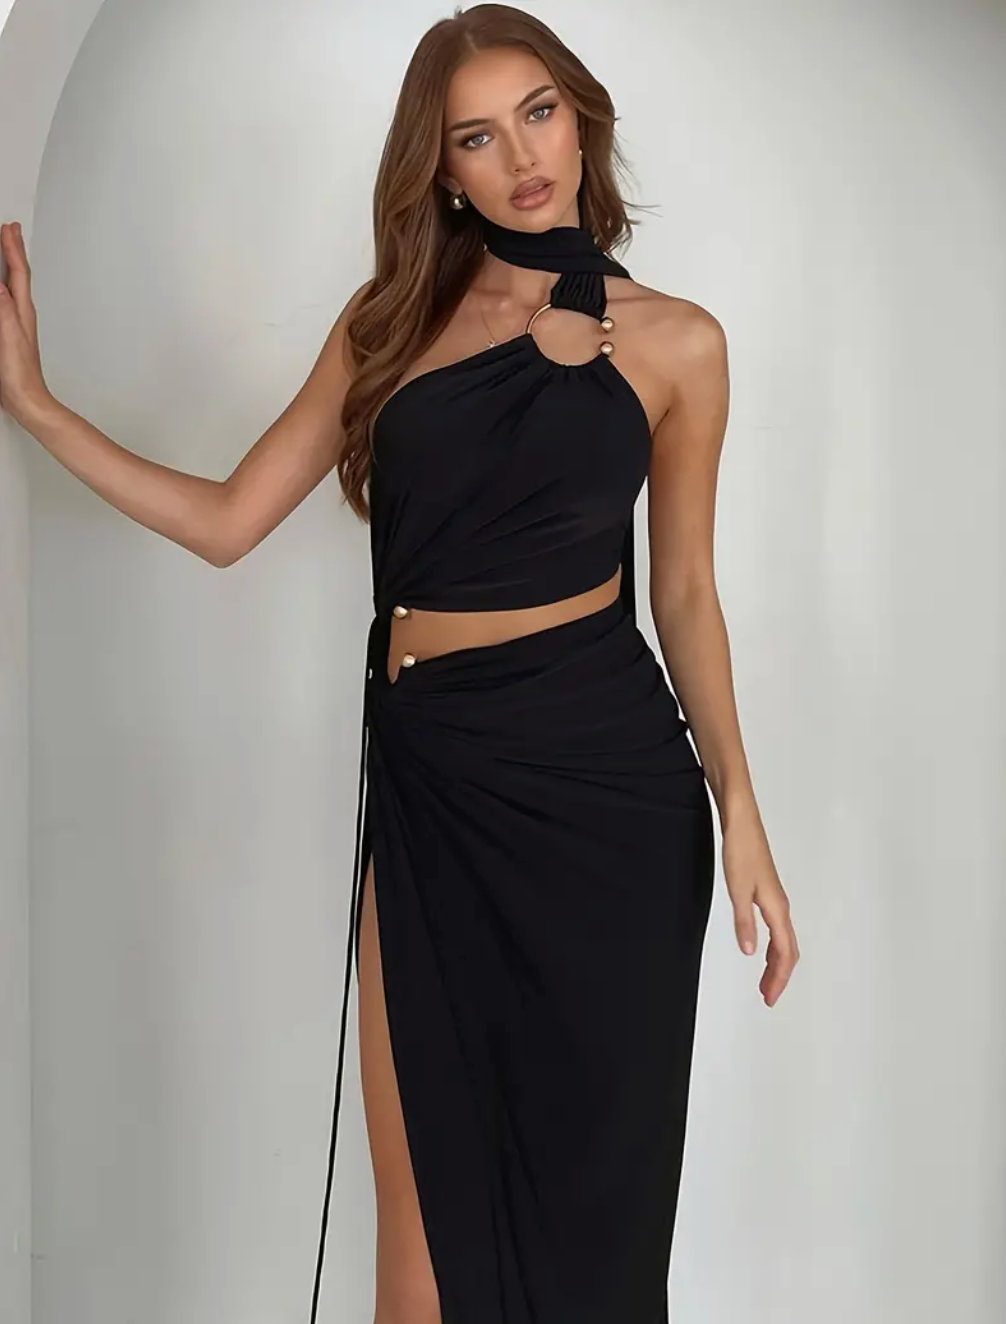 LLstyle Ruched Asymmetrical Cut Out Halter Dress